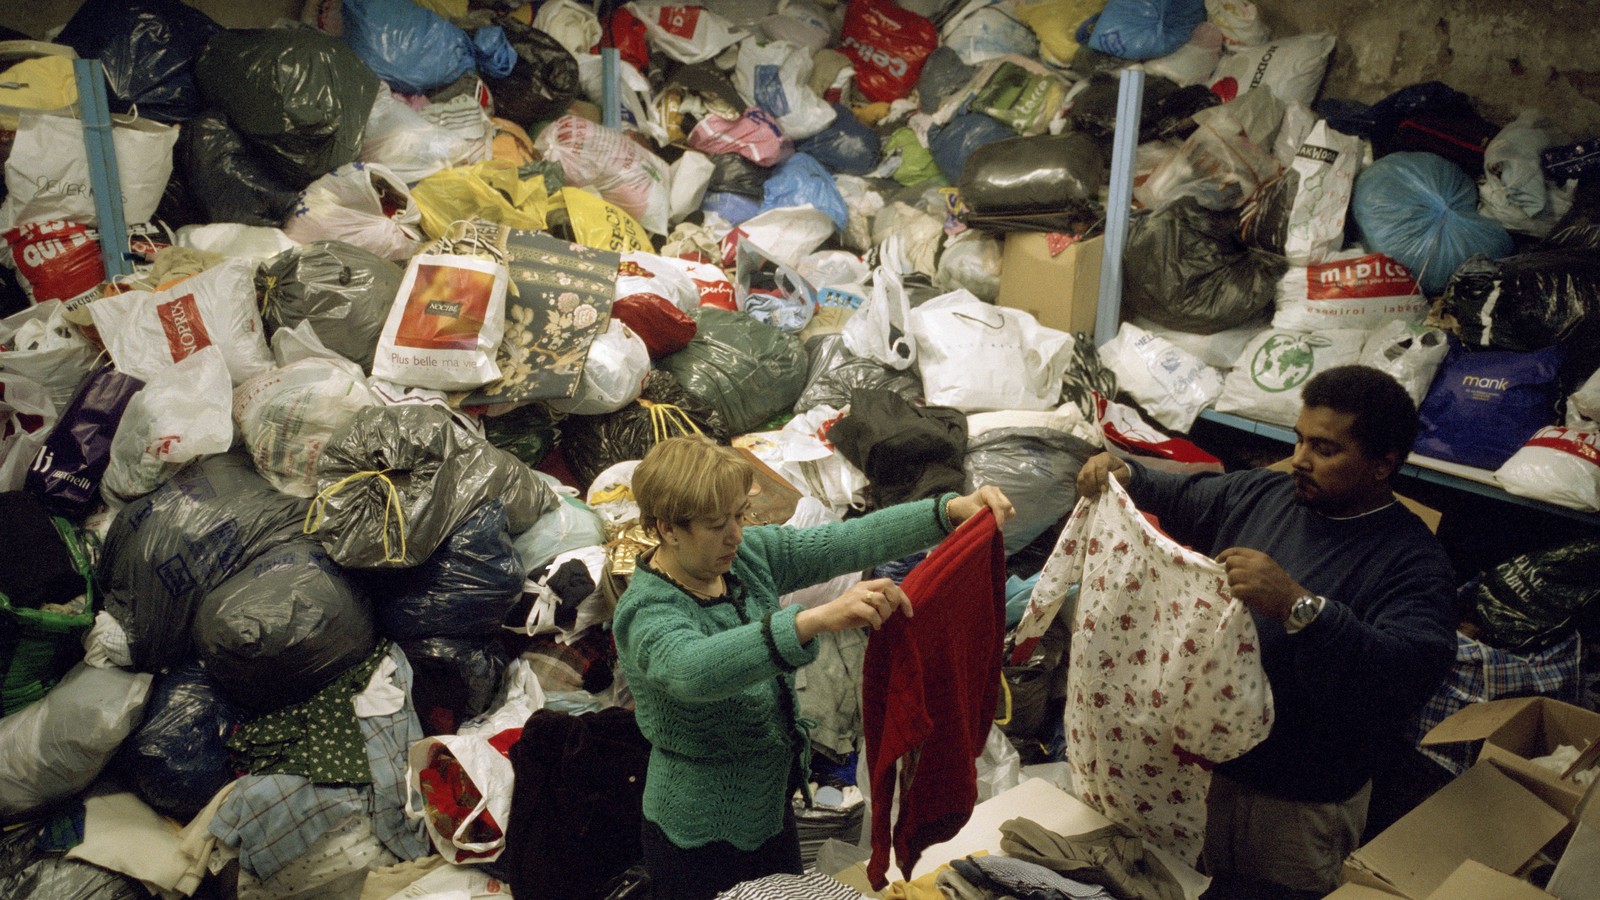 How to Sell, Donate or Recycle Your Stuff - The New York Times